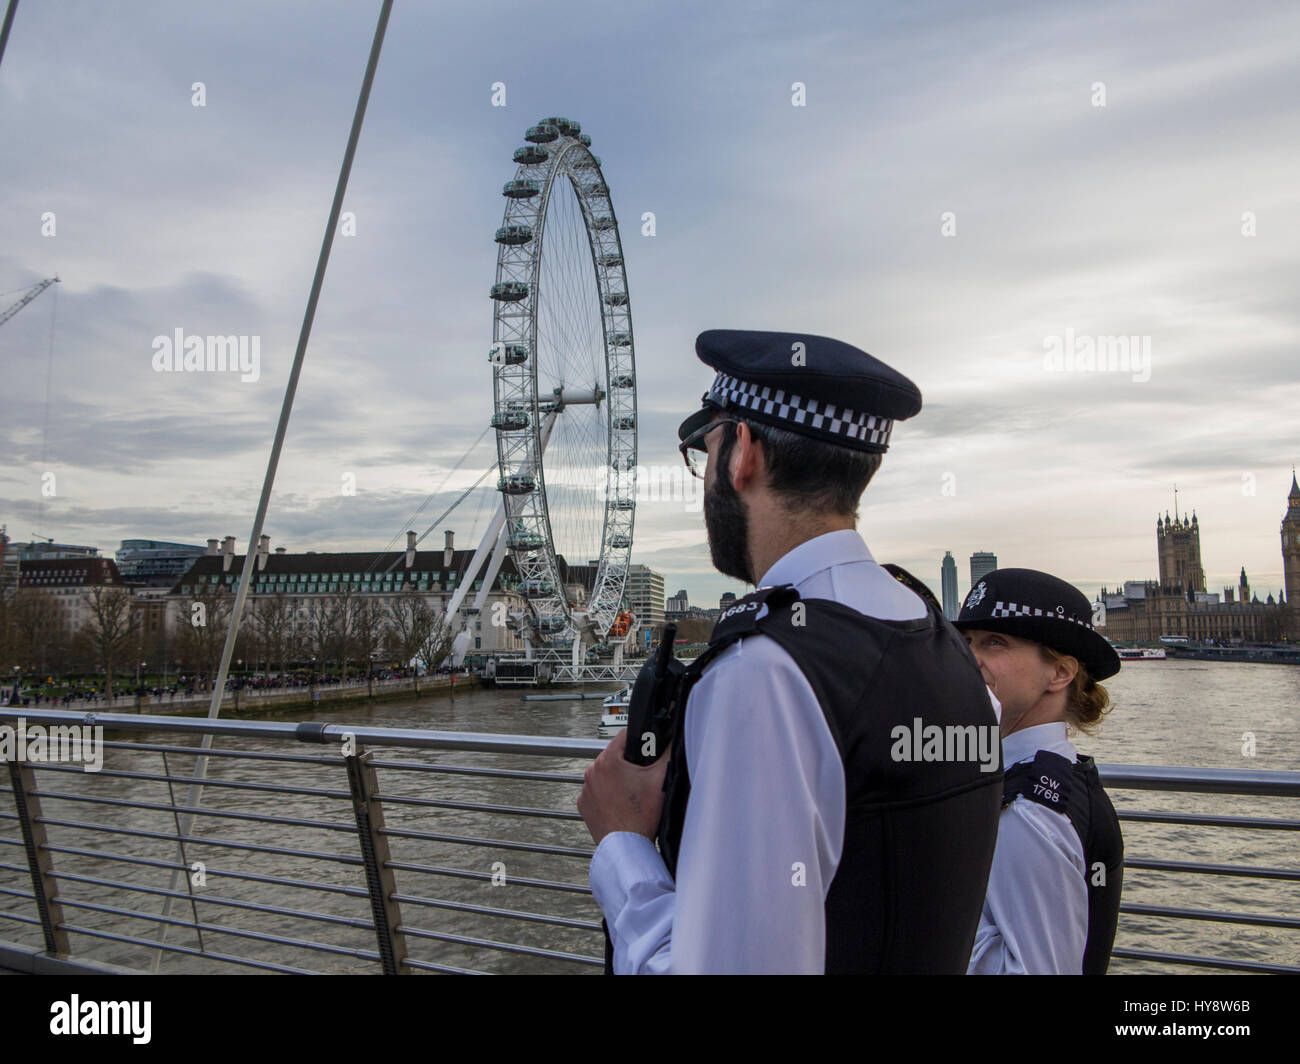 A police man and woman patrolling in London Stock Photo